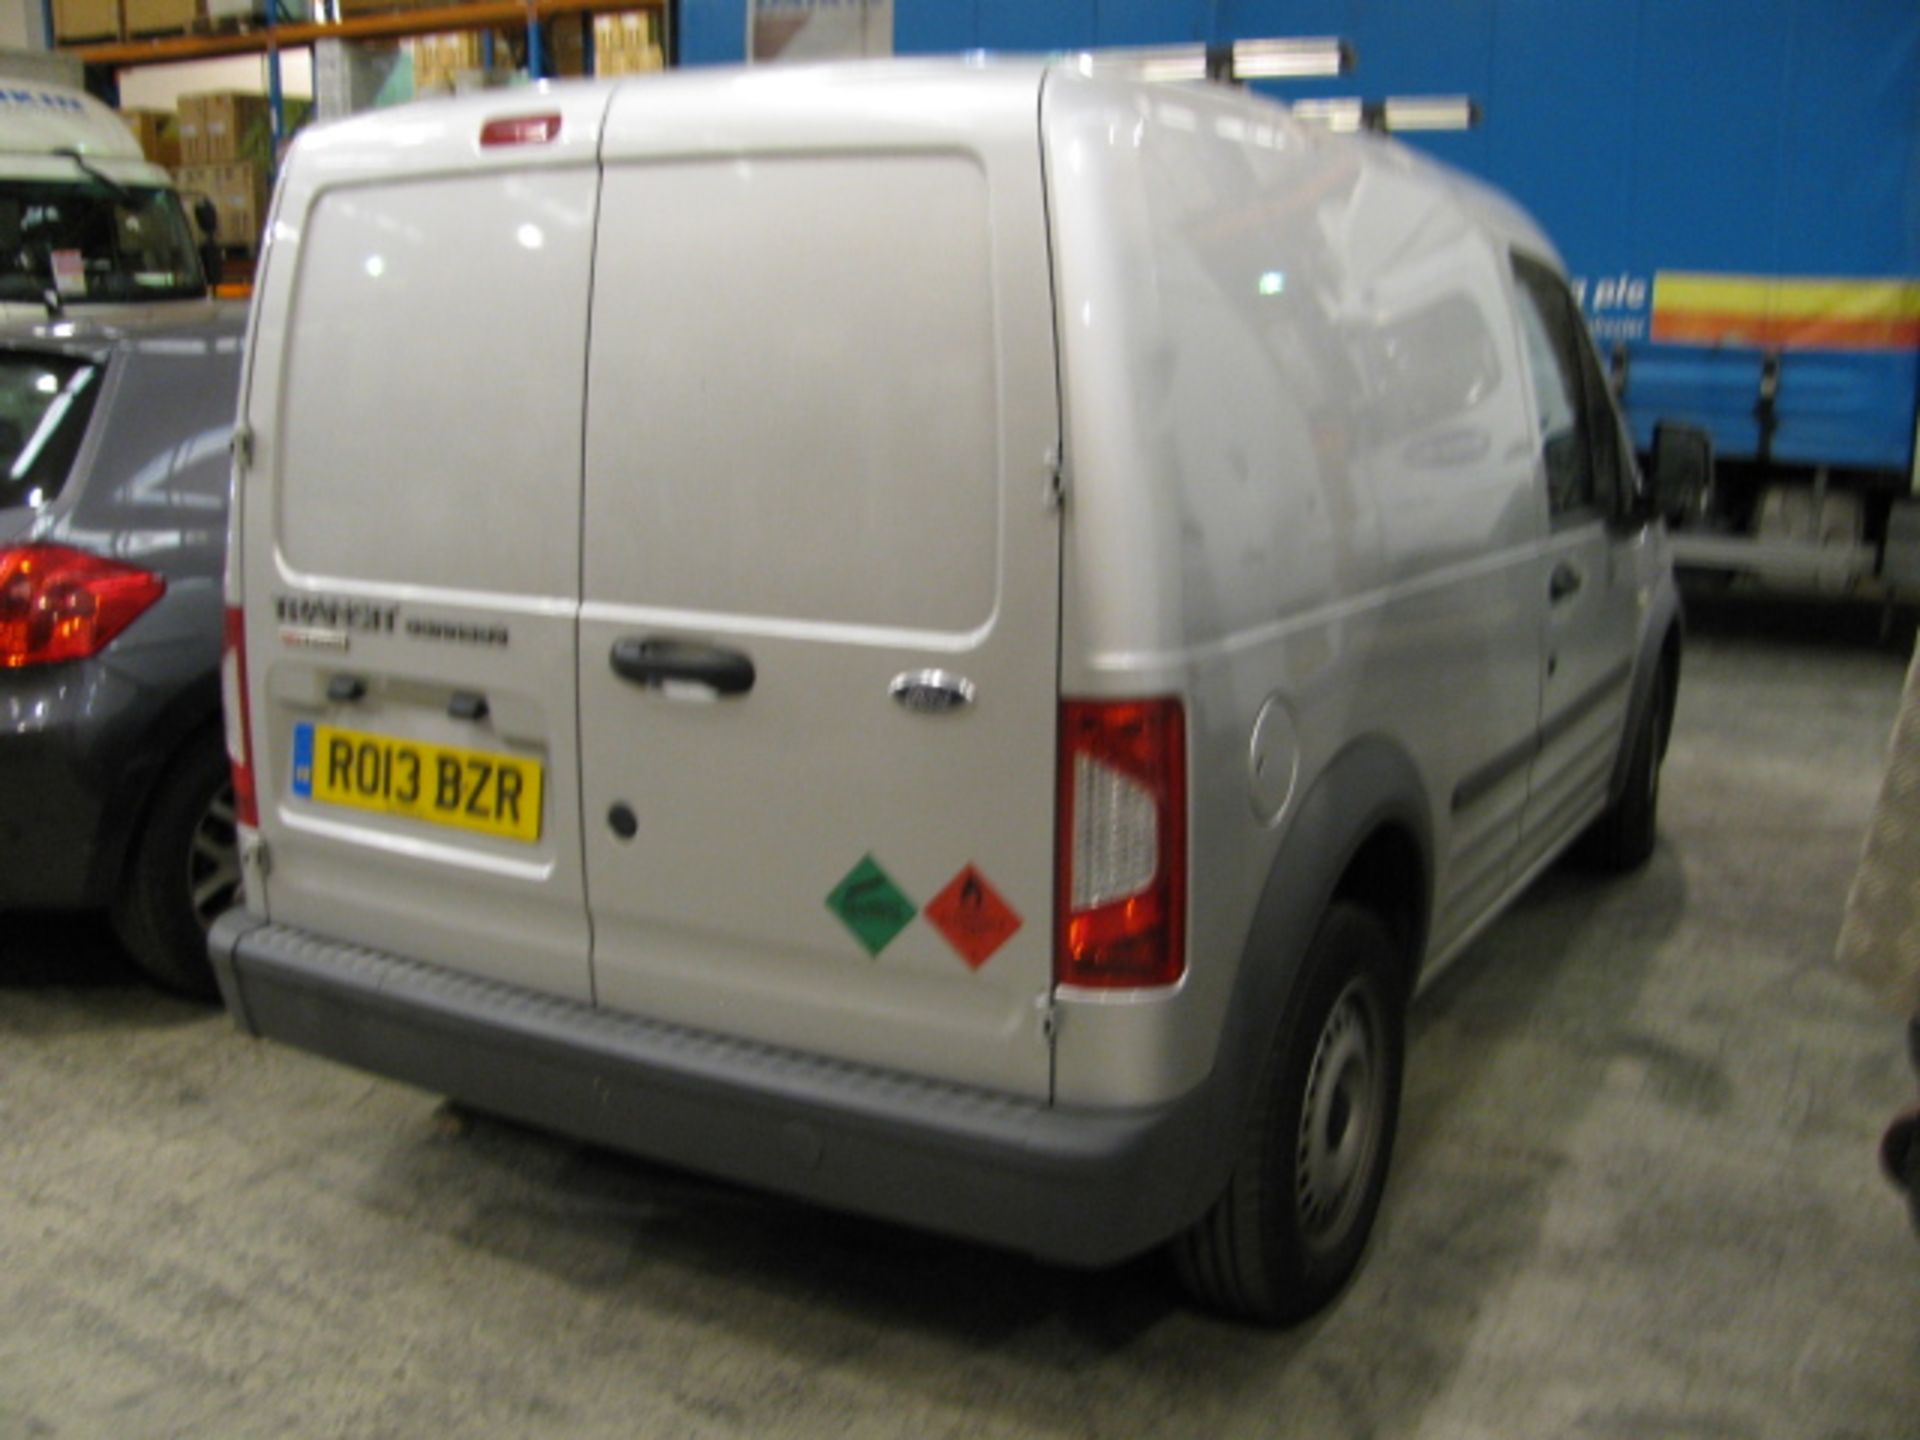 Ford transit connect 90T 200 swb panel Van, reg RO13 BZR, mileage 41739 approx - Image 3 of 4